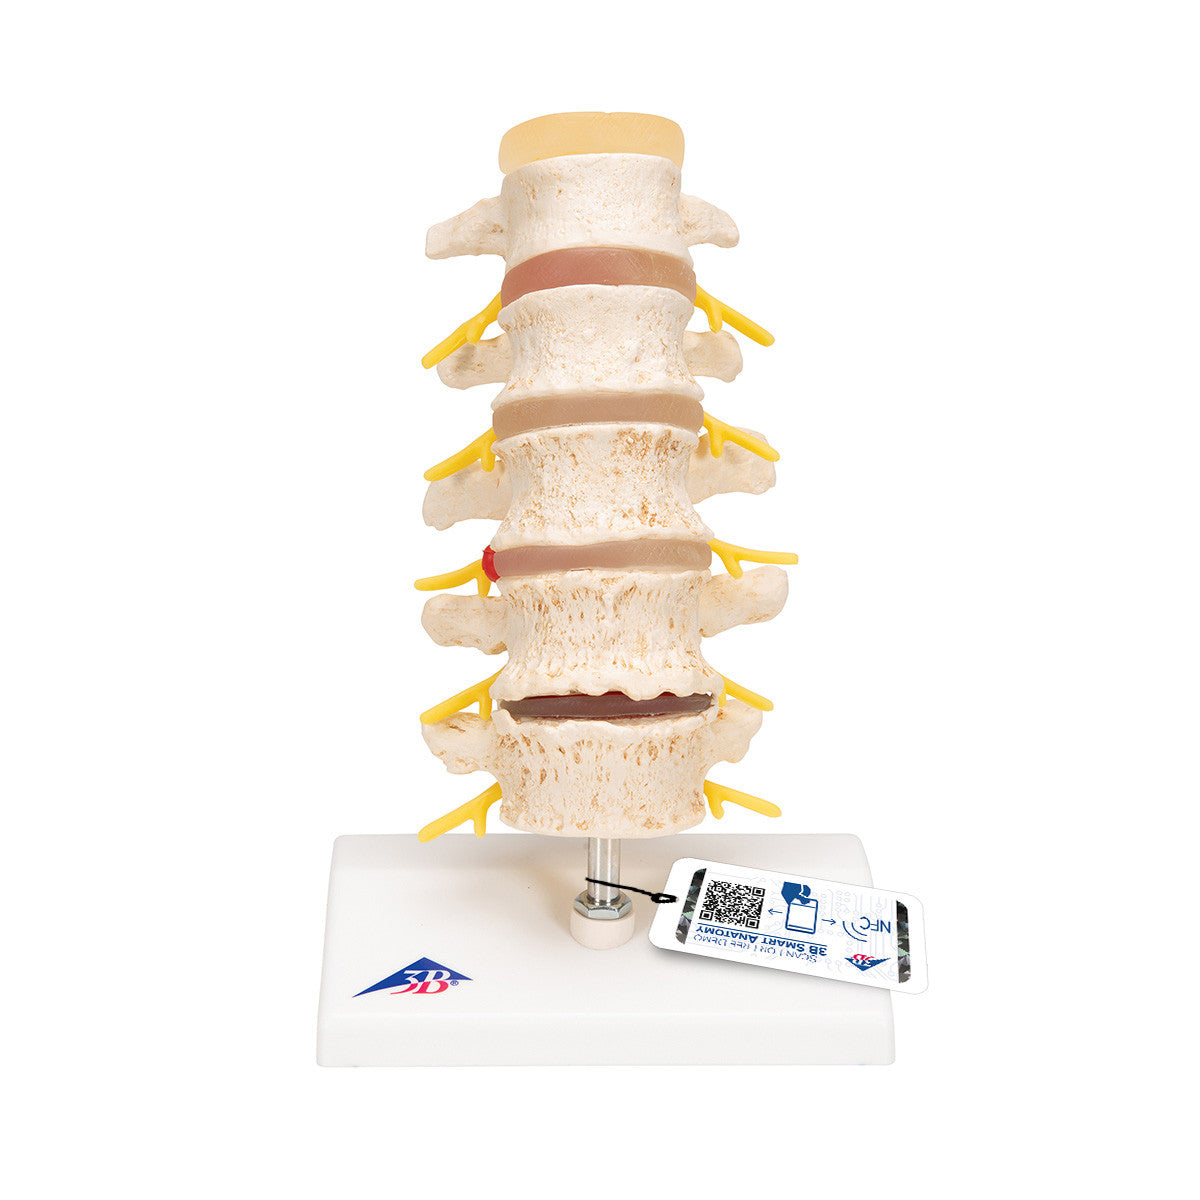 a795_01_1200_1200_stages-of-disc-prolapse-and-vertebral-degeneration-3b-smart-anatomy__26596.1589753282.1280.1280.jpg